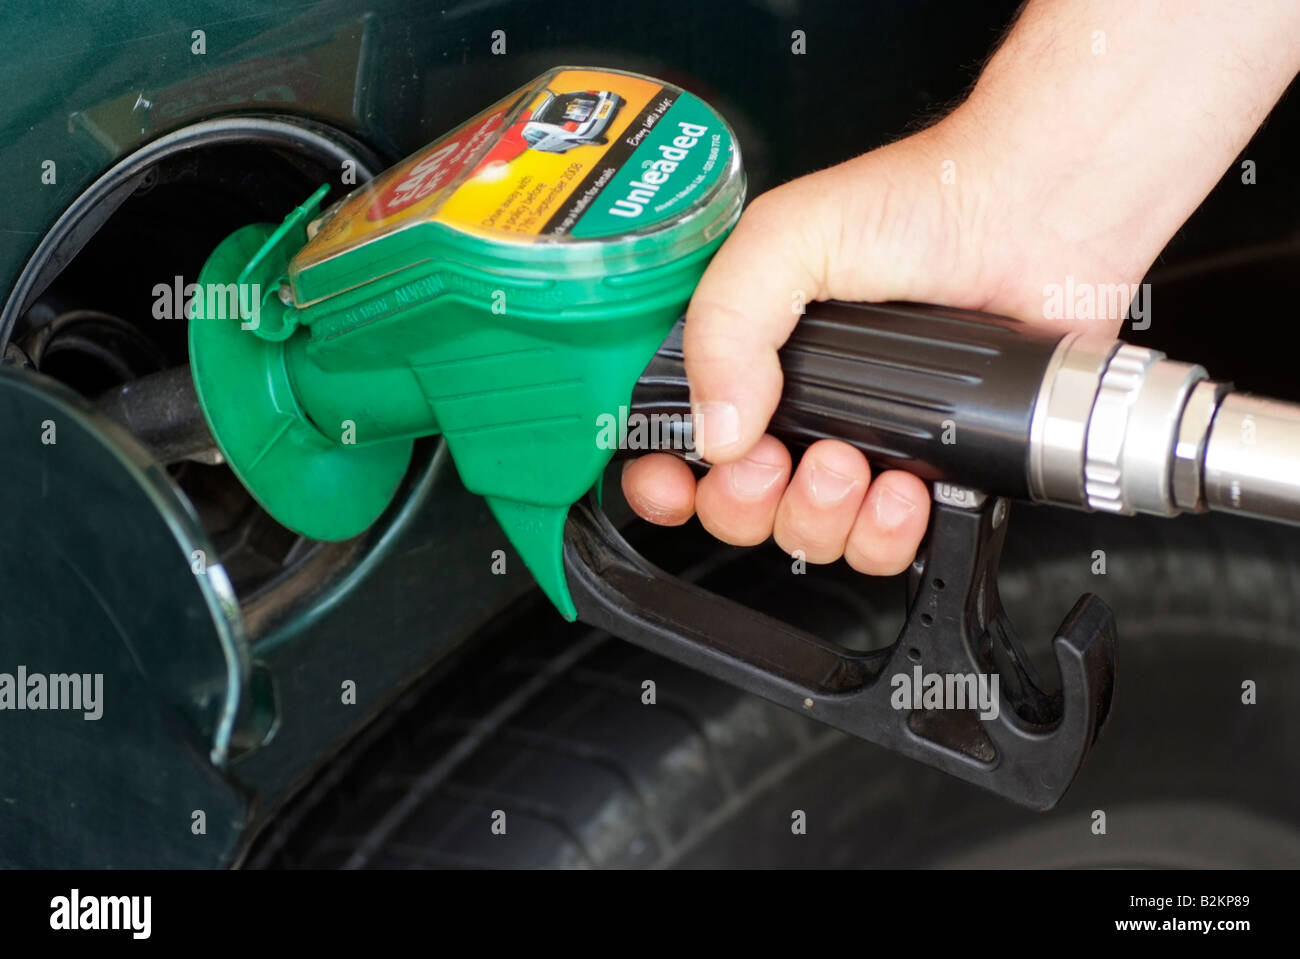 Filling car petrol tank with unleaded fuel at a Tesco filling station On the pump an advert promoting car insurance Stock Photo